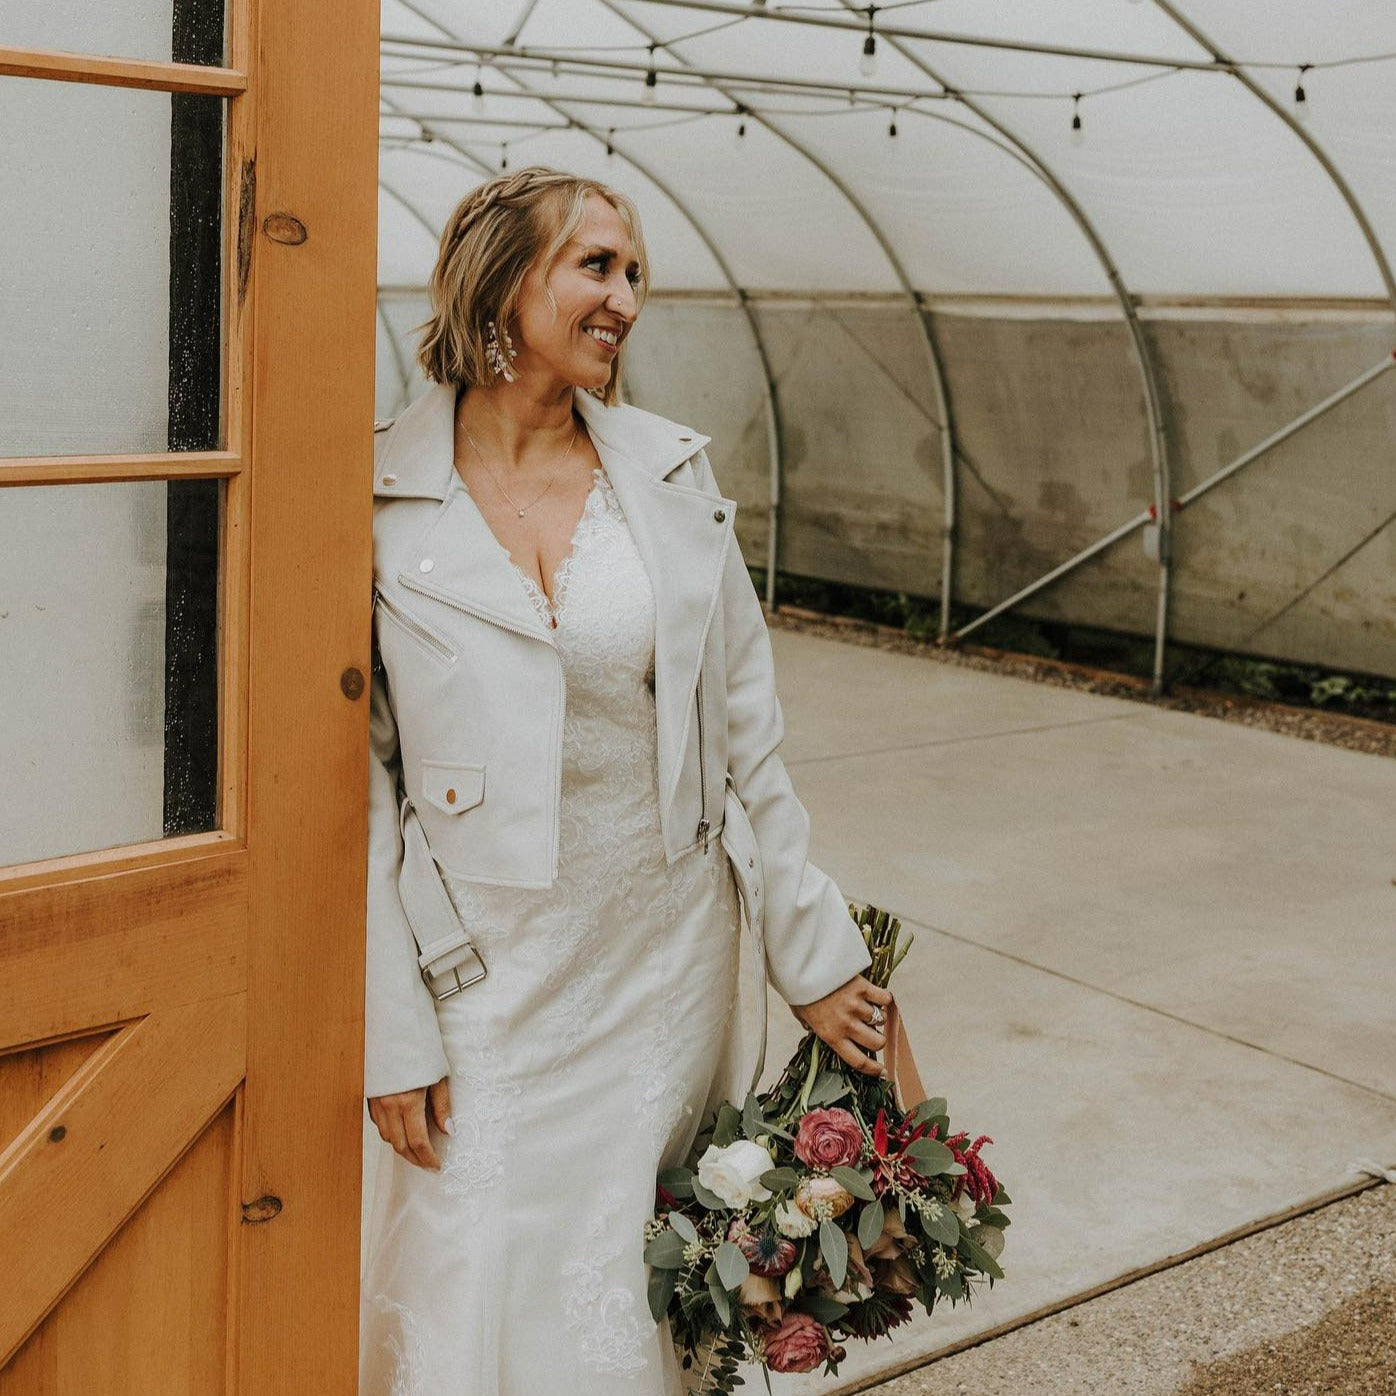 Custom bridal ivory jacket with embroidery – a unique and sentimental gift for the bride, providing a boho touch to her wedding attire